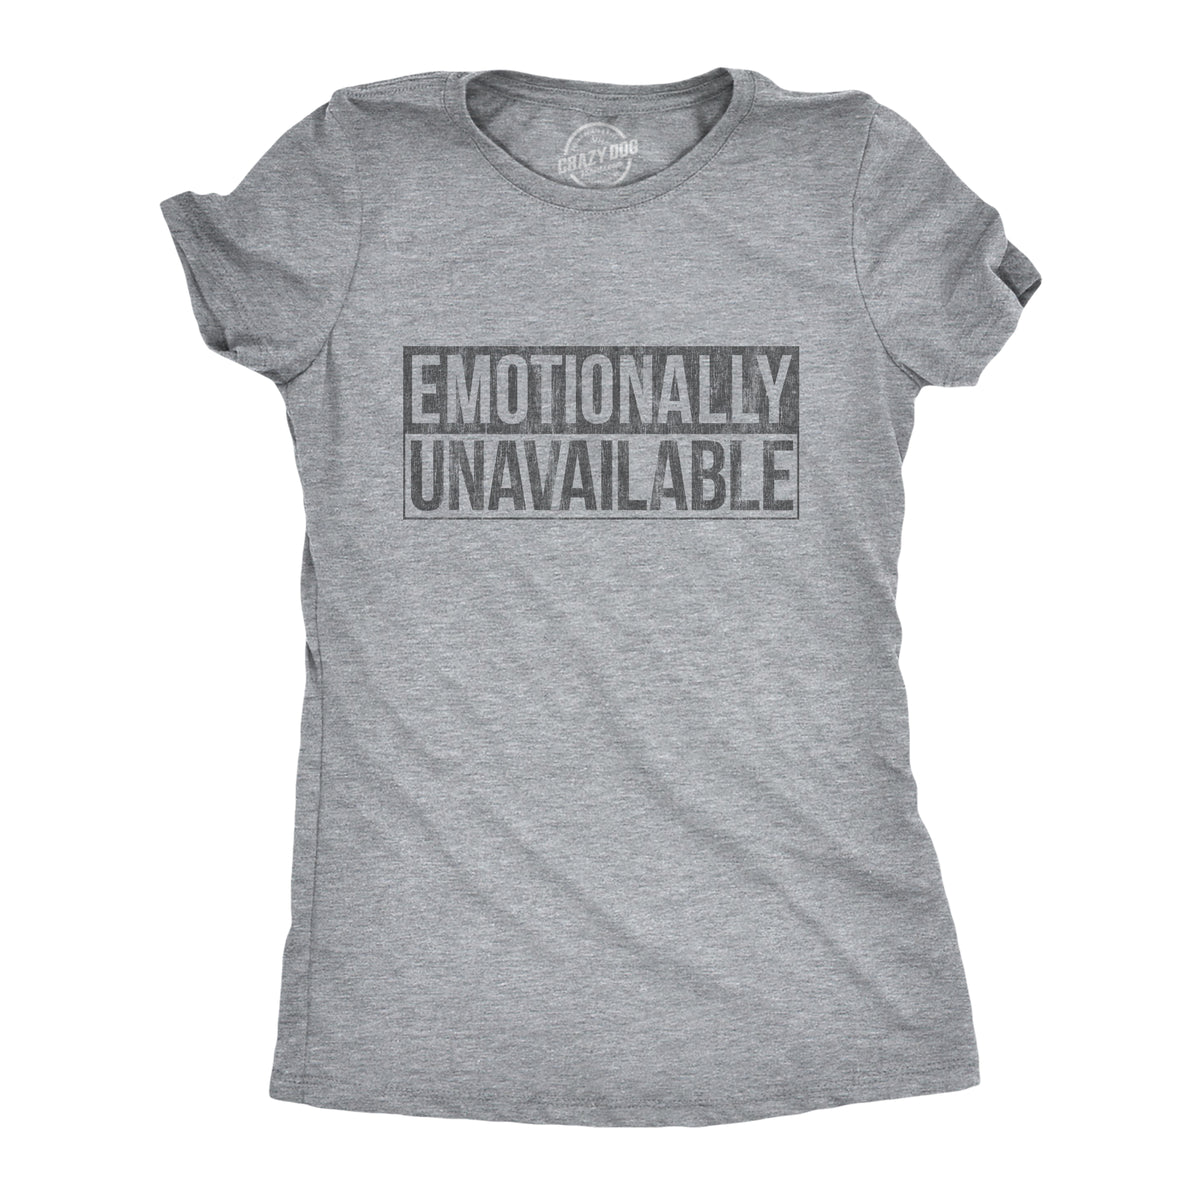 Funny Light Heather Grey Emotionally Unavailable Womens T Shirt Nerdy Valentine&#39;s Day Introvert Nerdy Tee